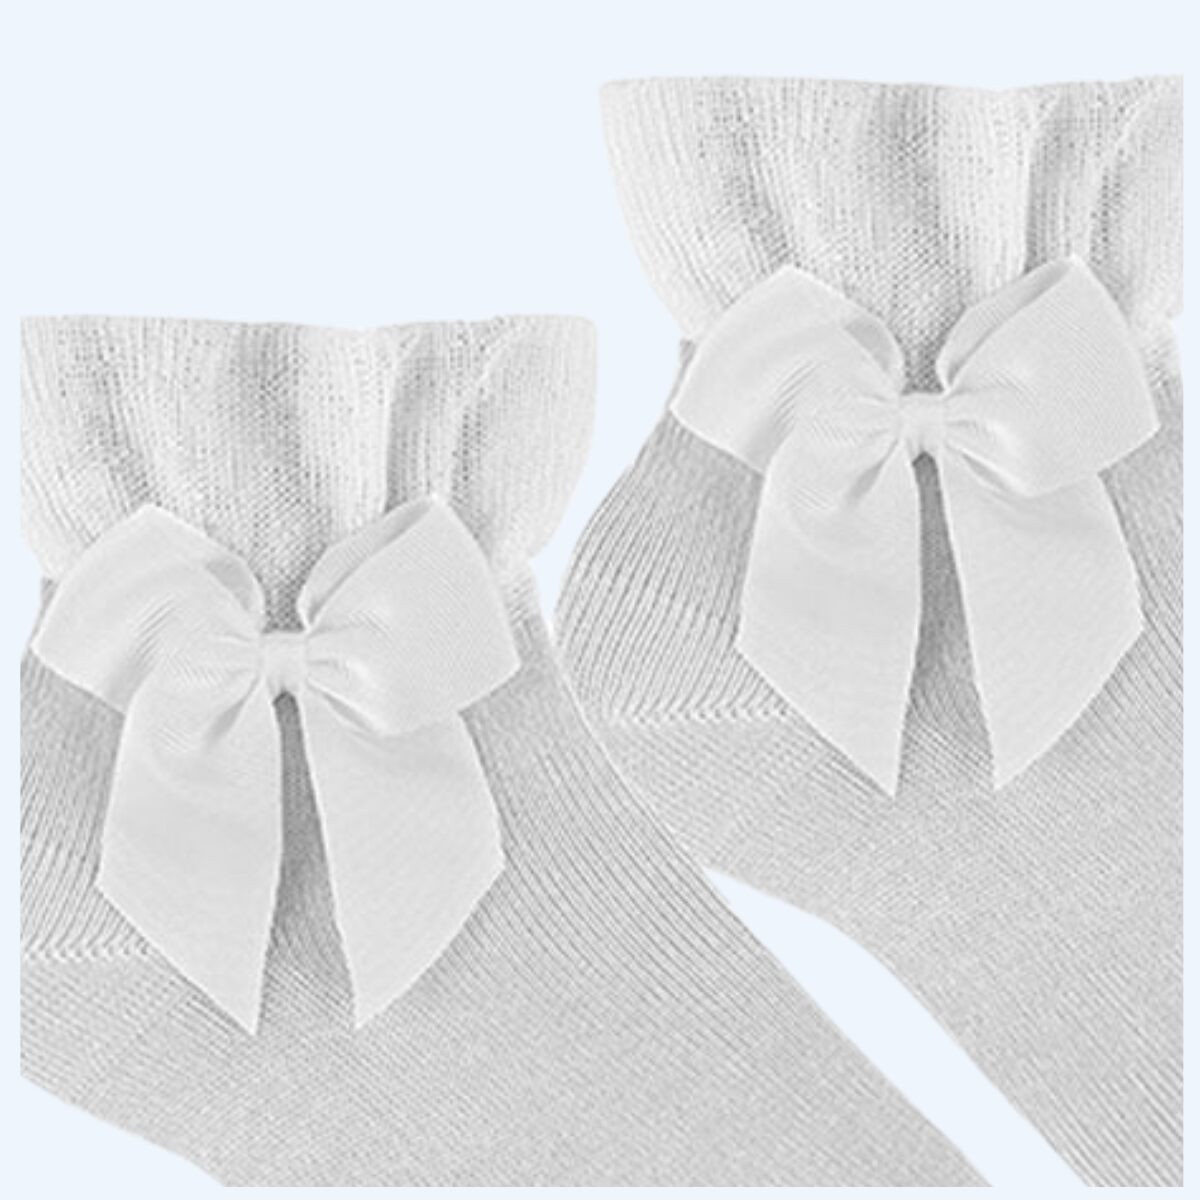 CEREMONY ANKLE SOCKSWITH GROSSGRAIN BOW CONDOR - 3